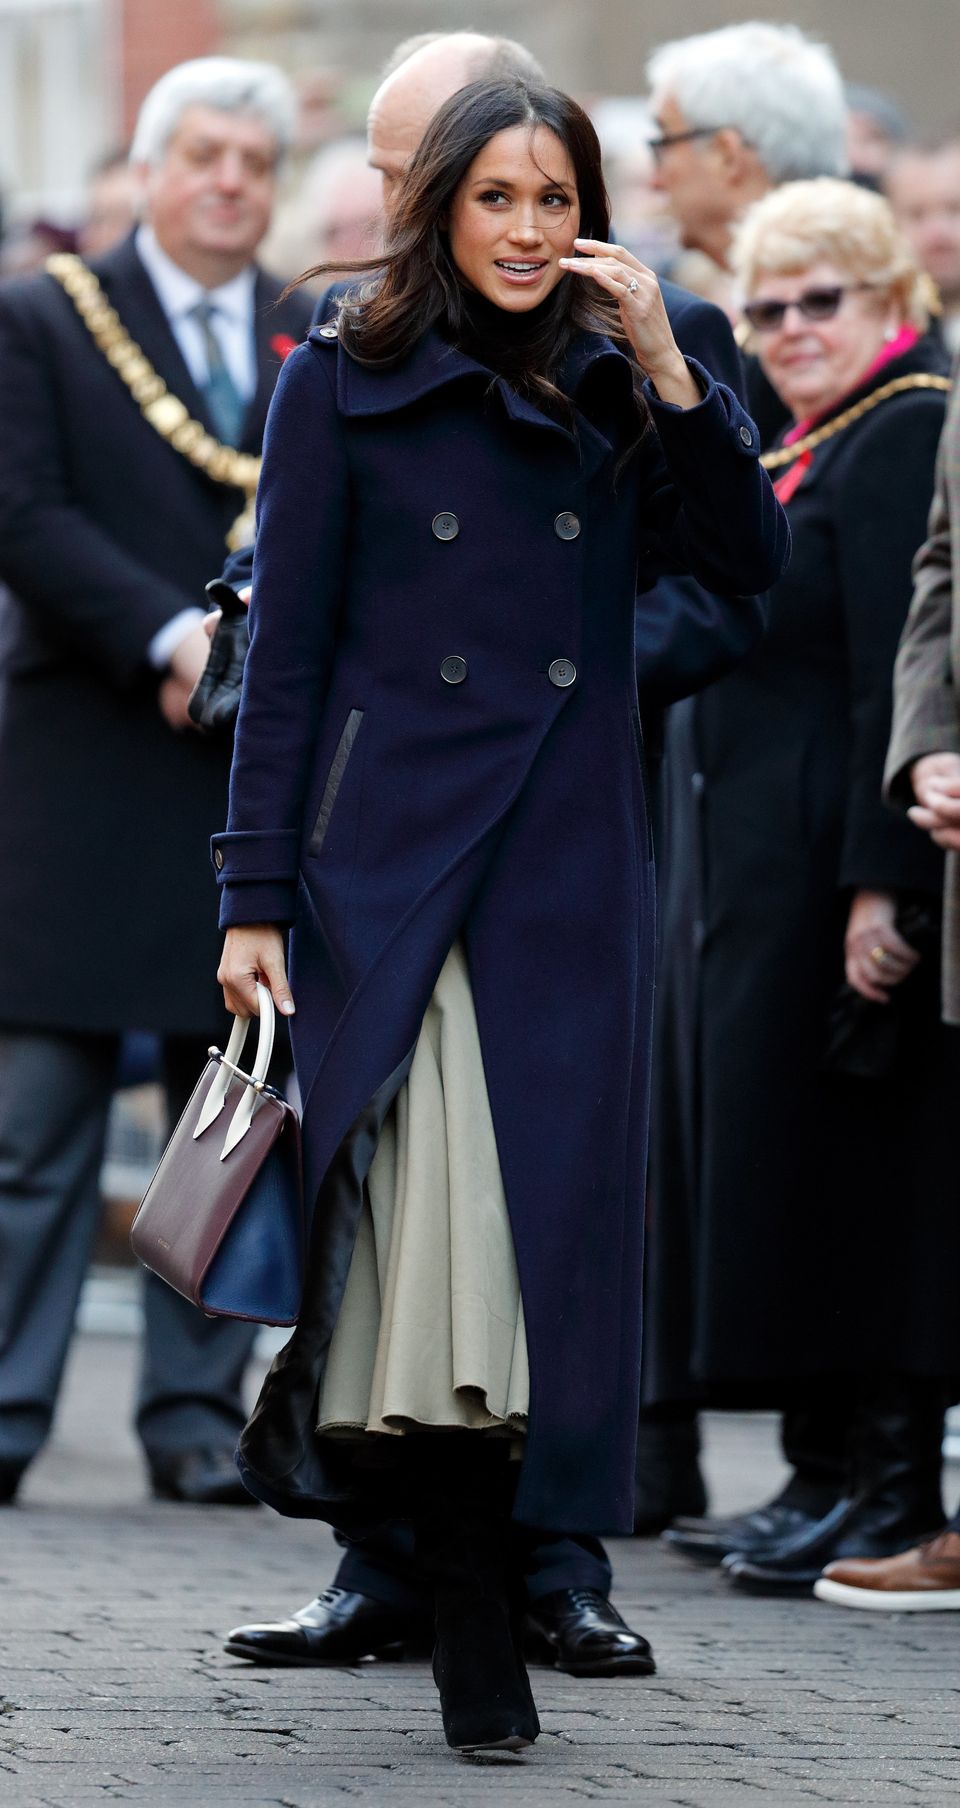 Photos Of Meghan Markle's Style Transformation Through The Years ...